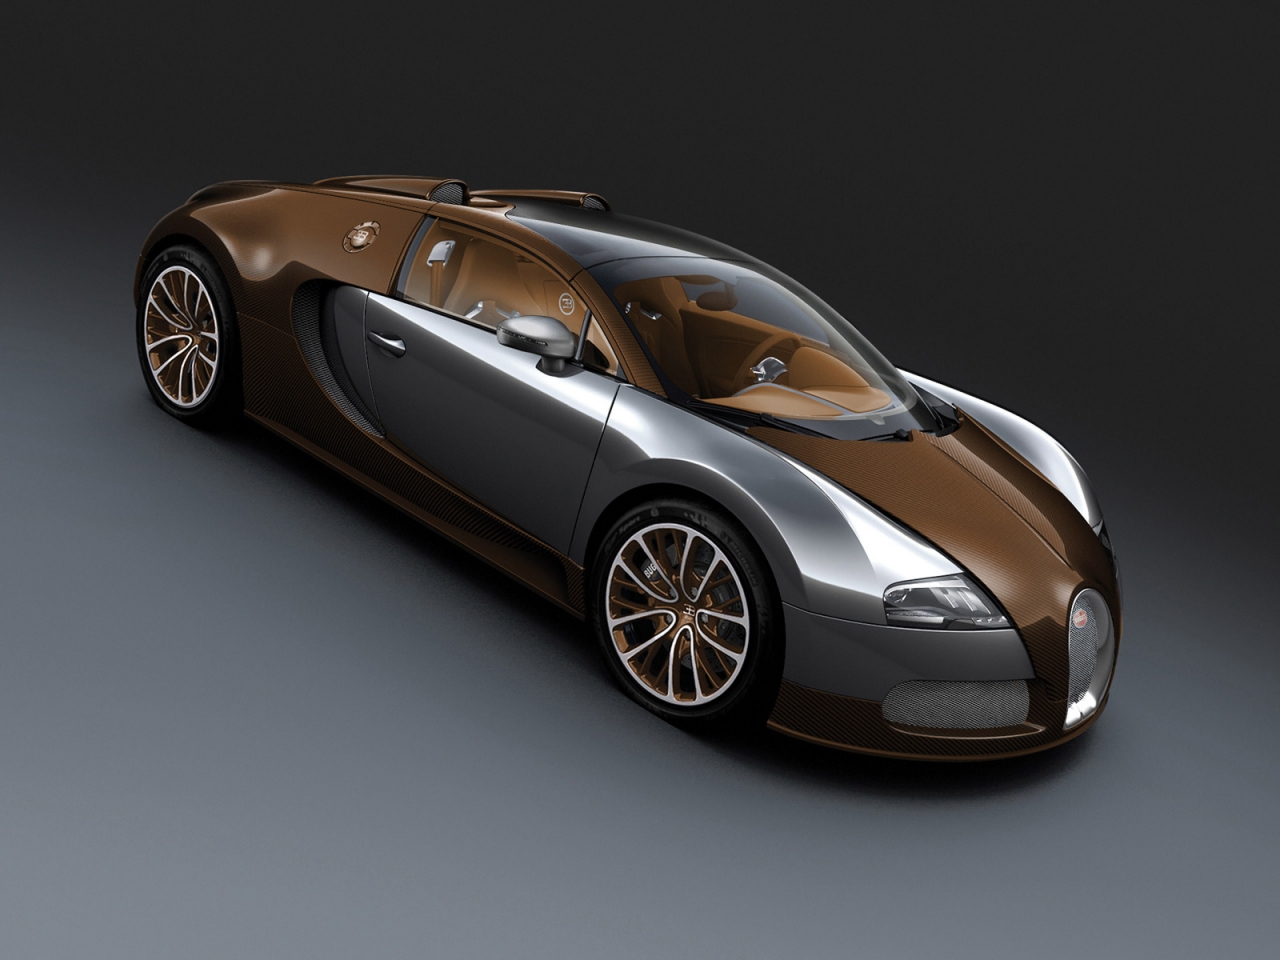 2012 Bugatti Veyron Bronce Carbon for 1280 x 960 resolution